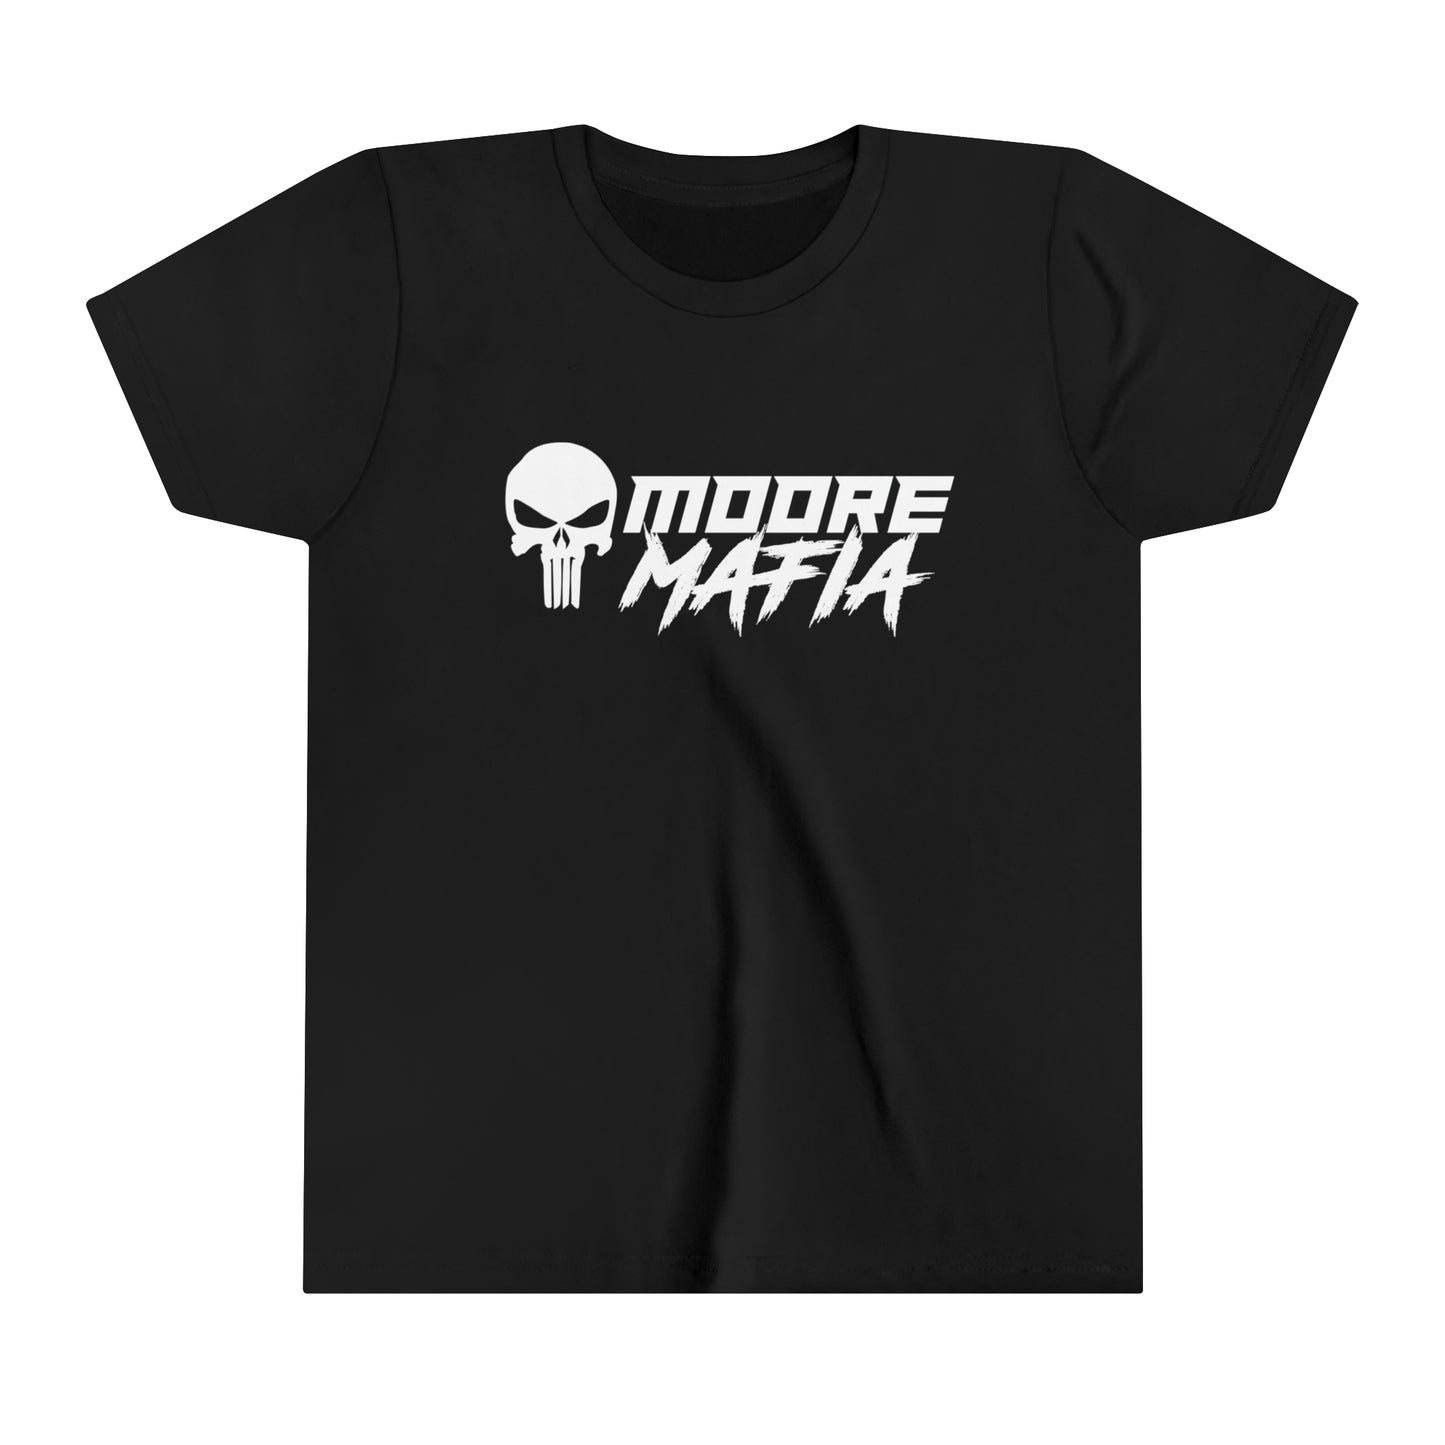 Race Fuel & Burnt Rubber Youth Short Sleeve T-Shirt